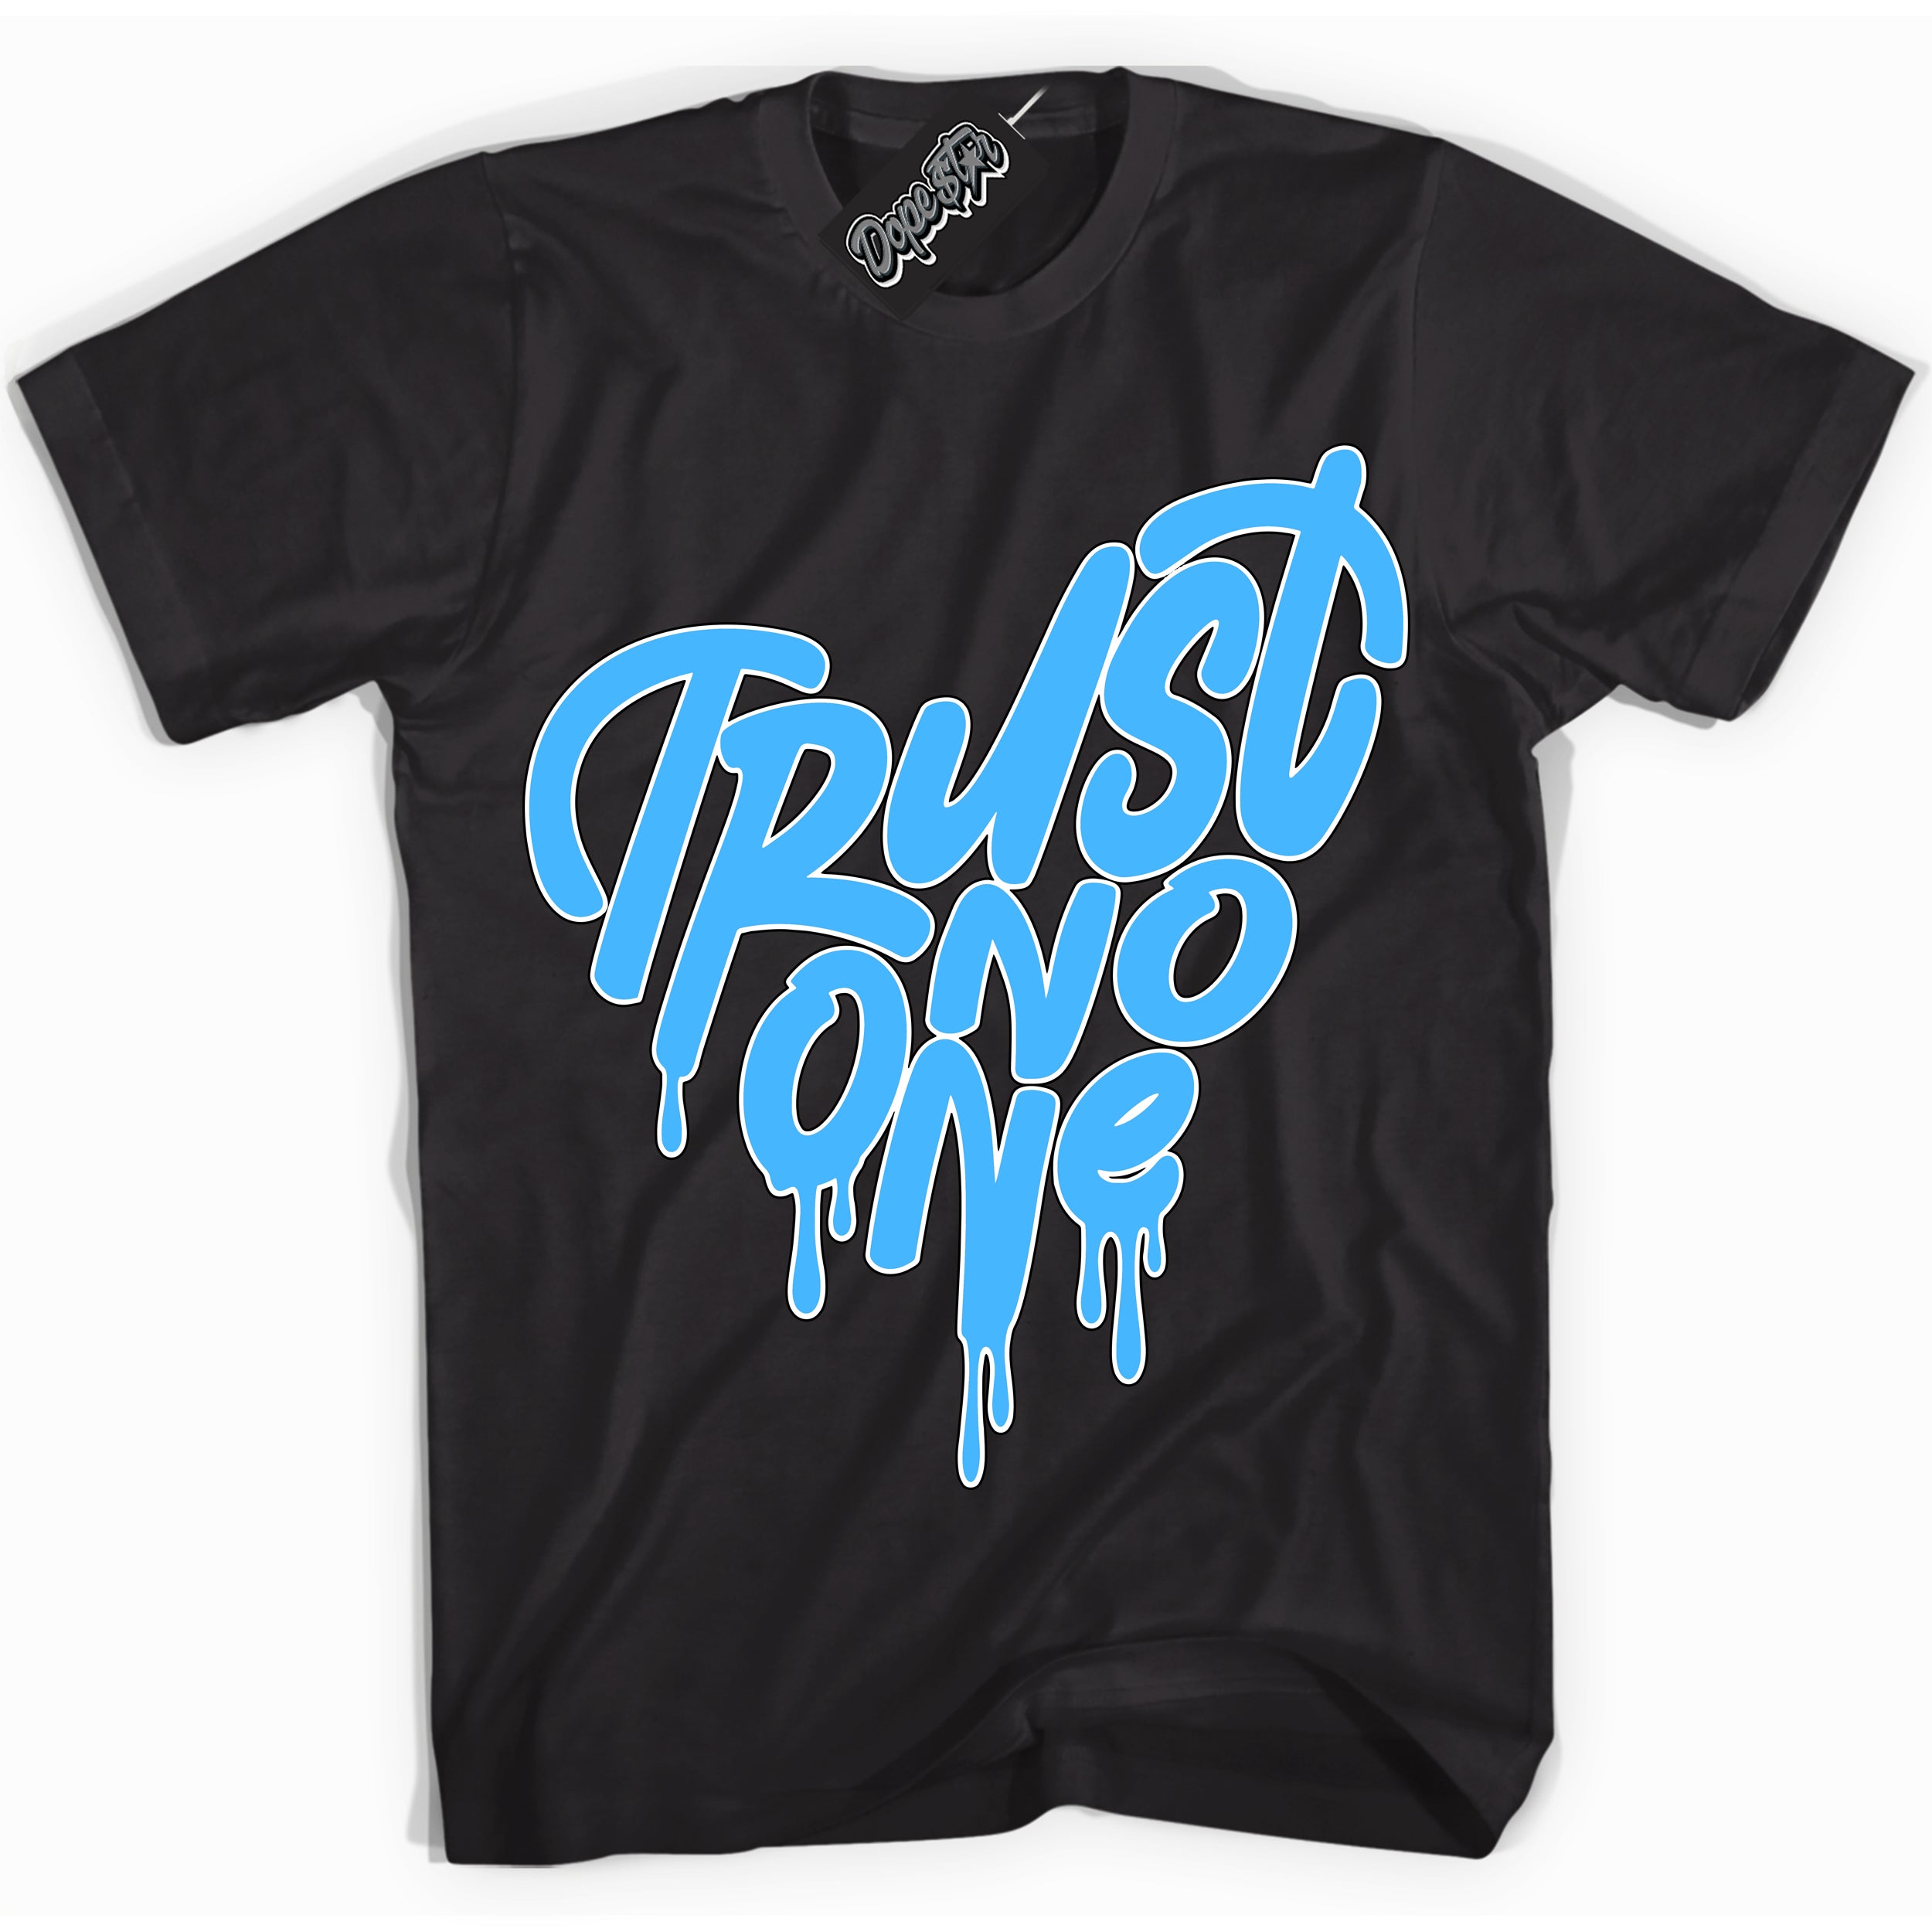 Cool Black graphic tee with “ Trust No One Heart ” design, that perfectly matches Powder Blue 9s sneakers 